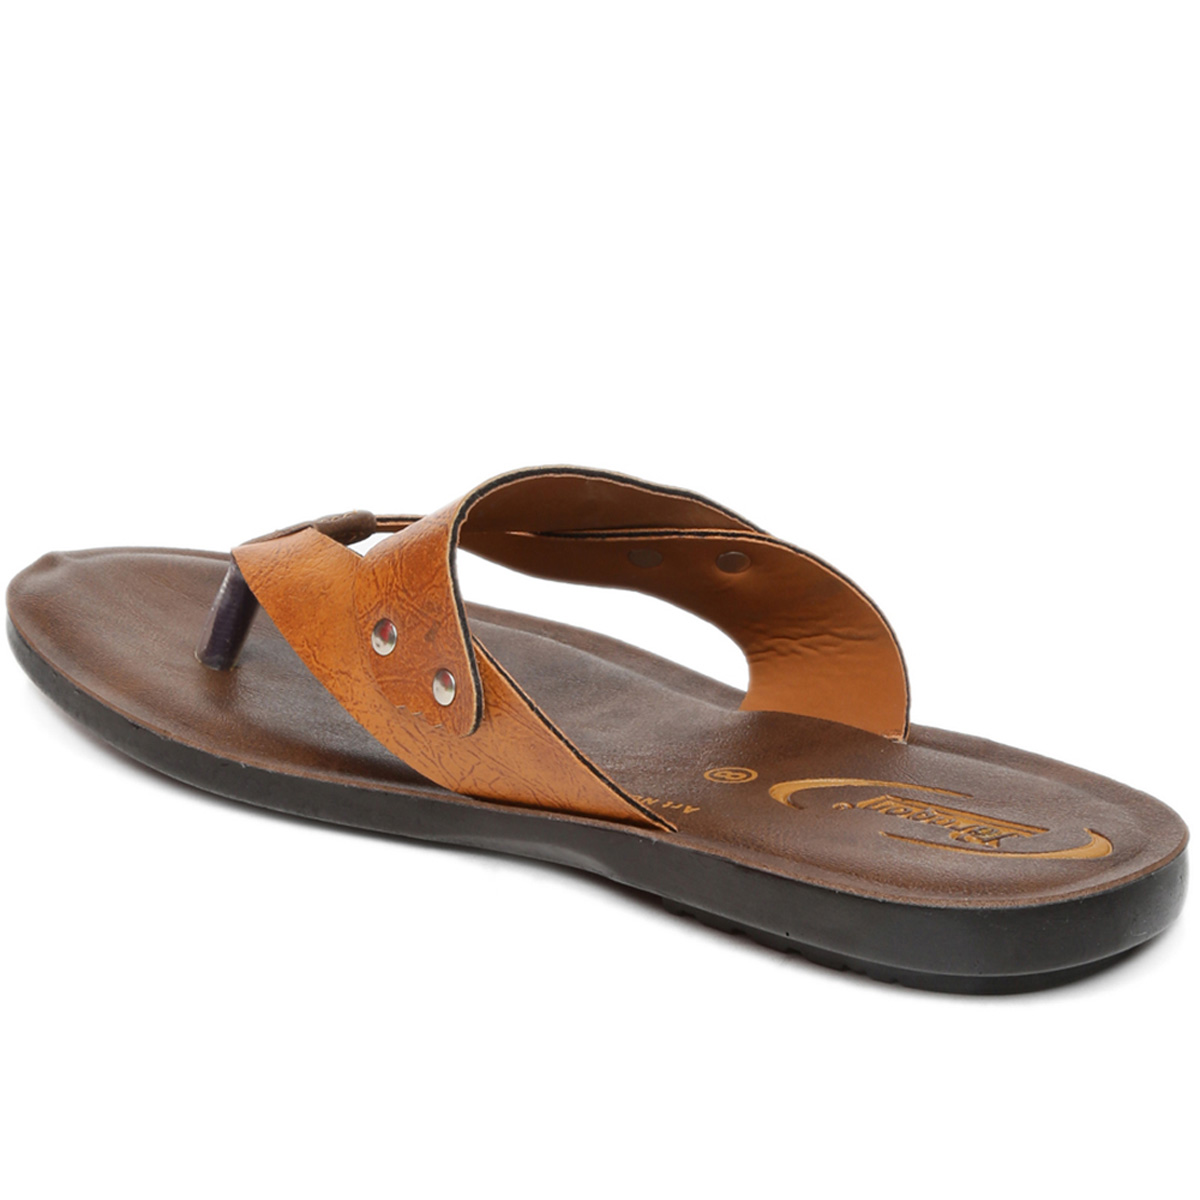 Buy Paragon Men'S Formal Brown Slippers Online @ ₹309 from ShopClues